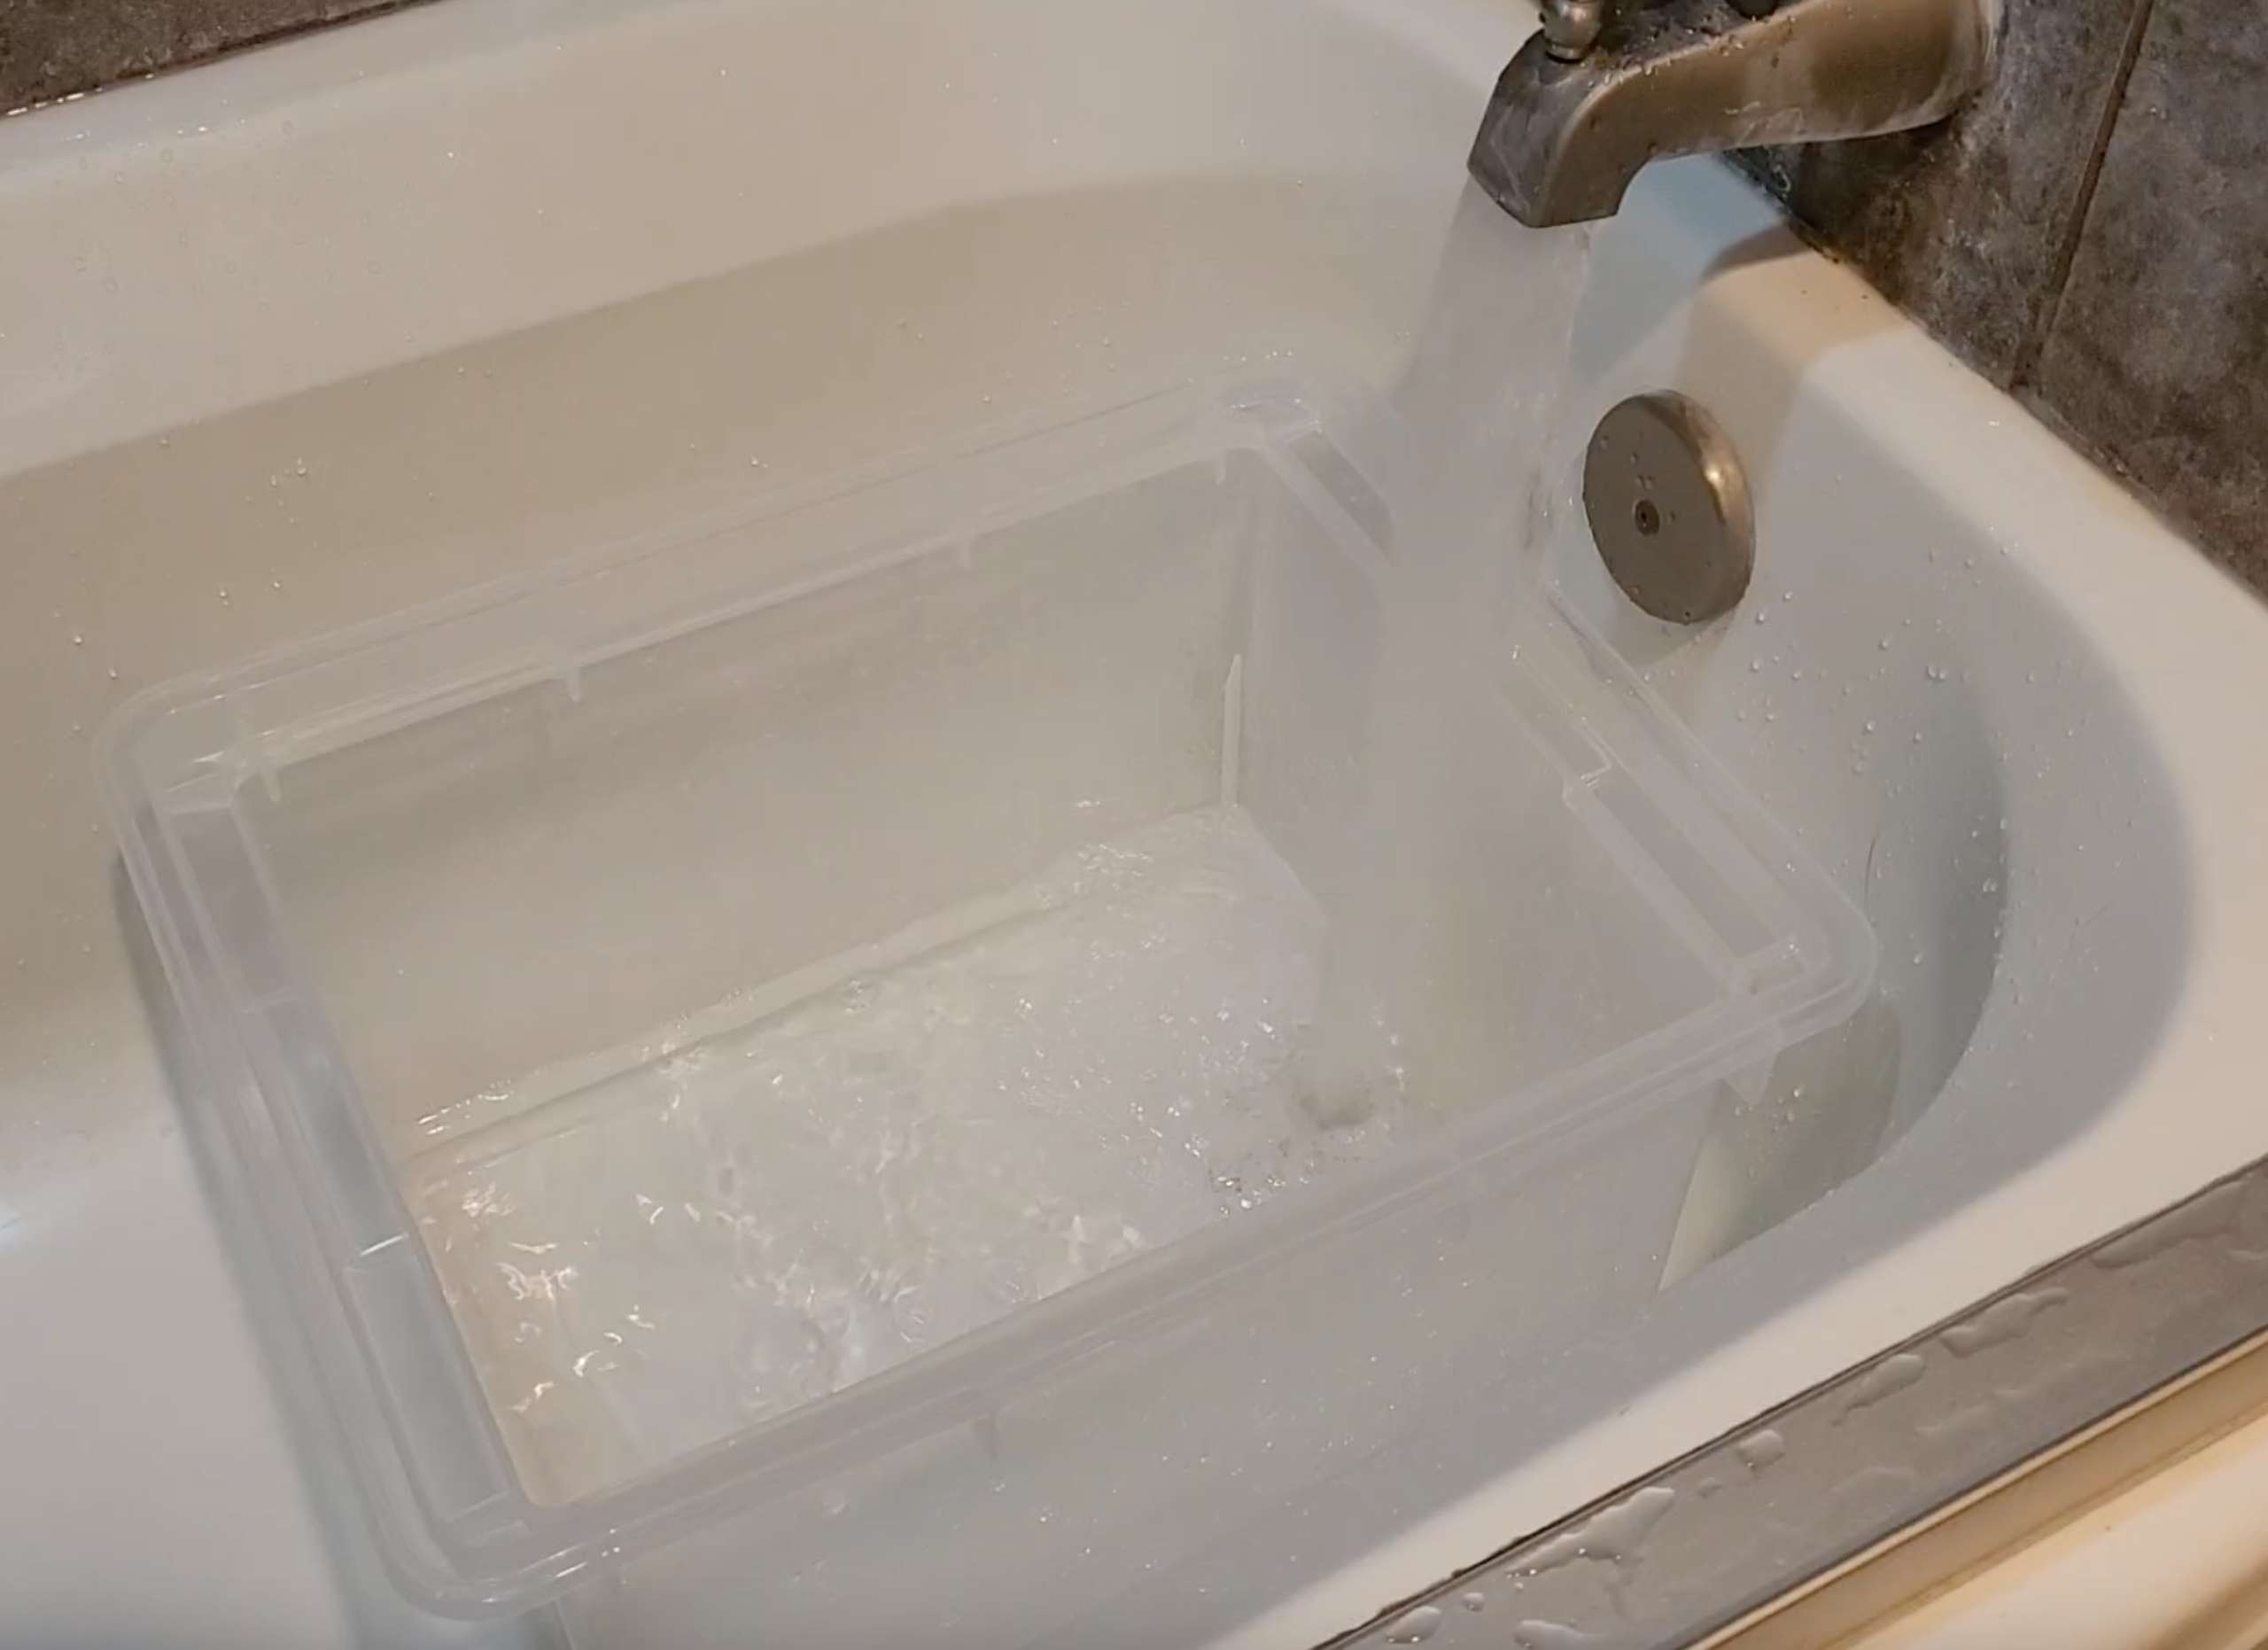 a water basin sitting in a bathtub being filled with lukewarm water from the tap